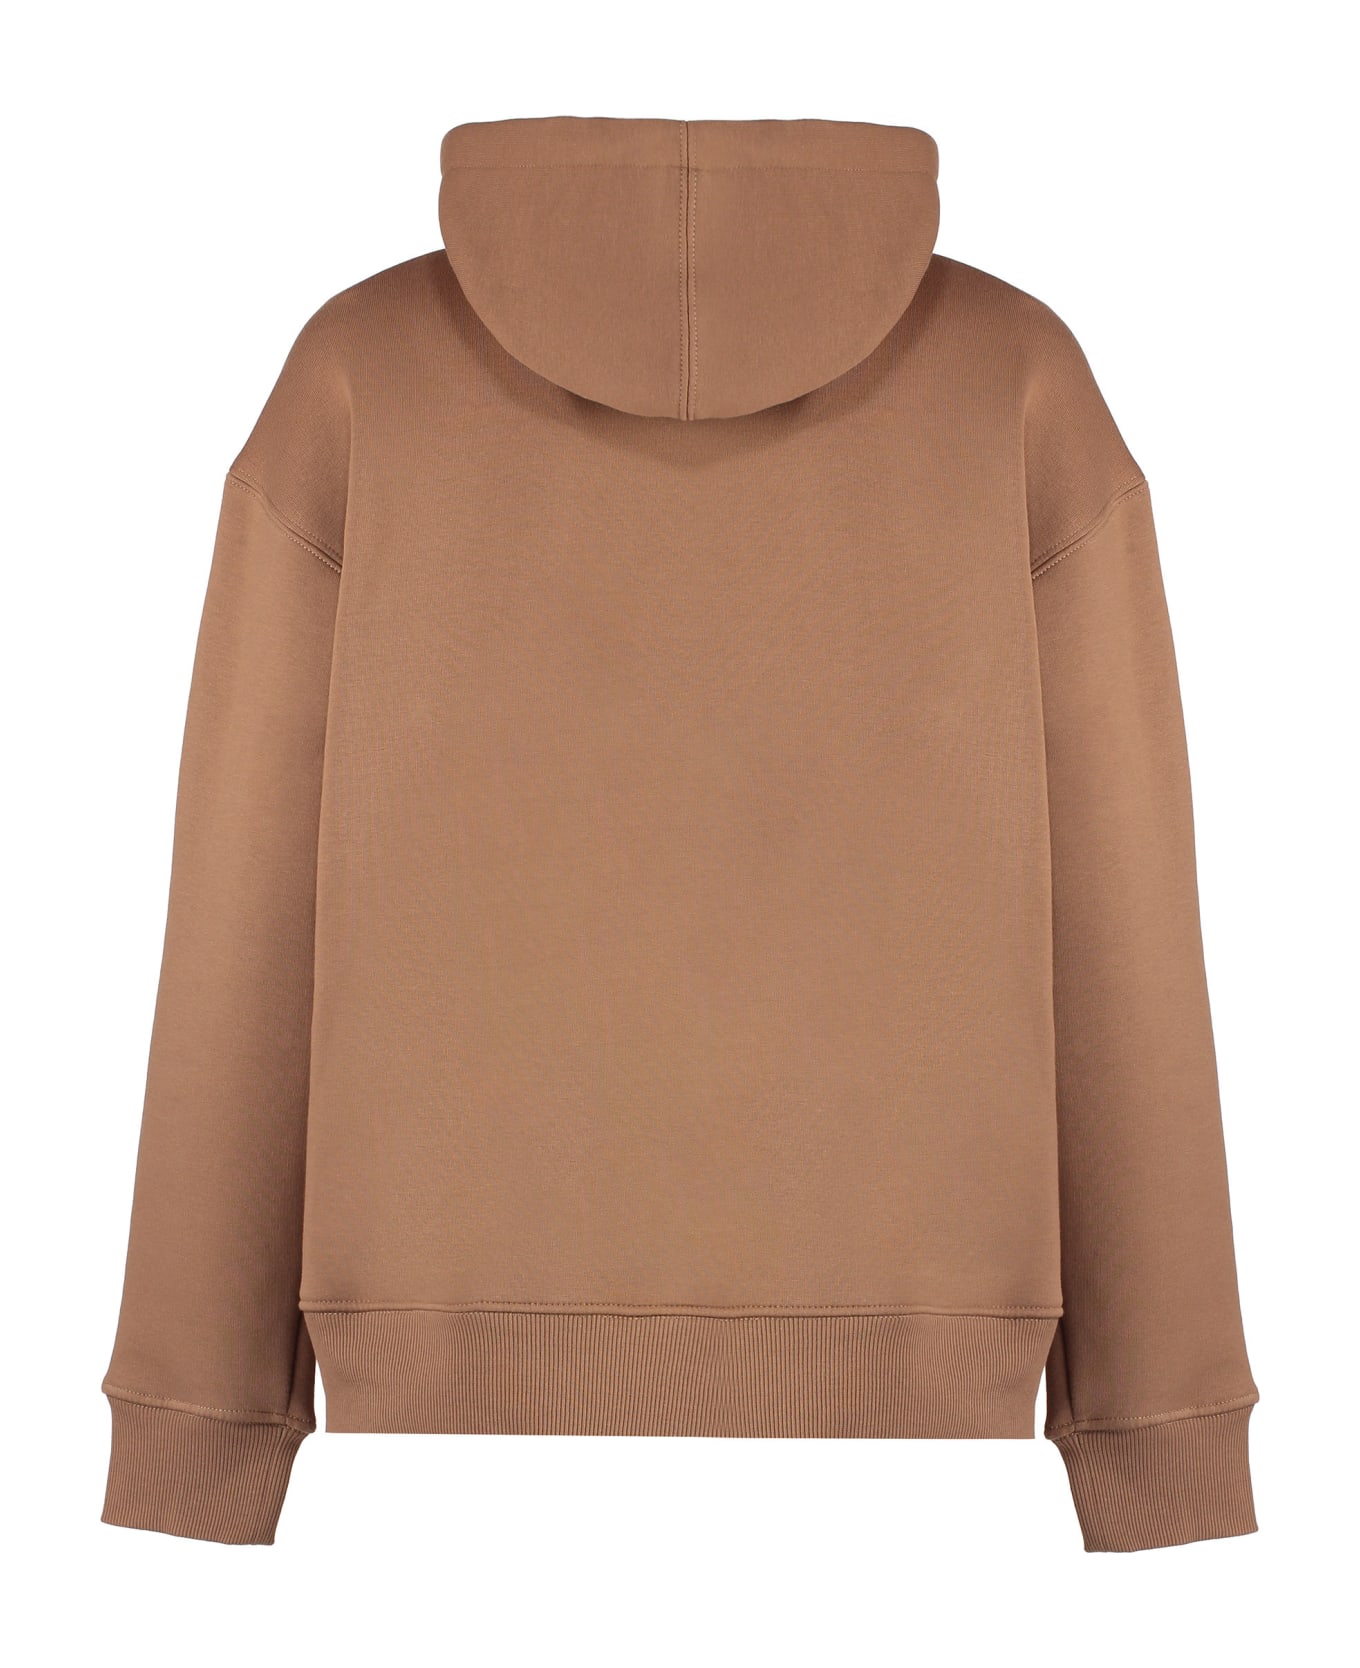 'S Max Mara Agre Cotton Hoodie - brown